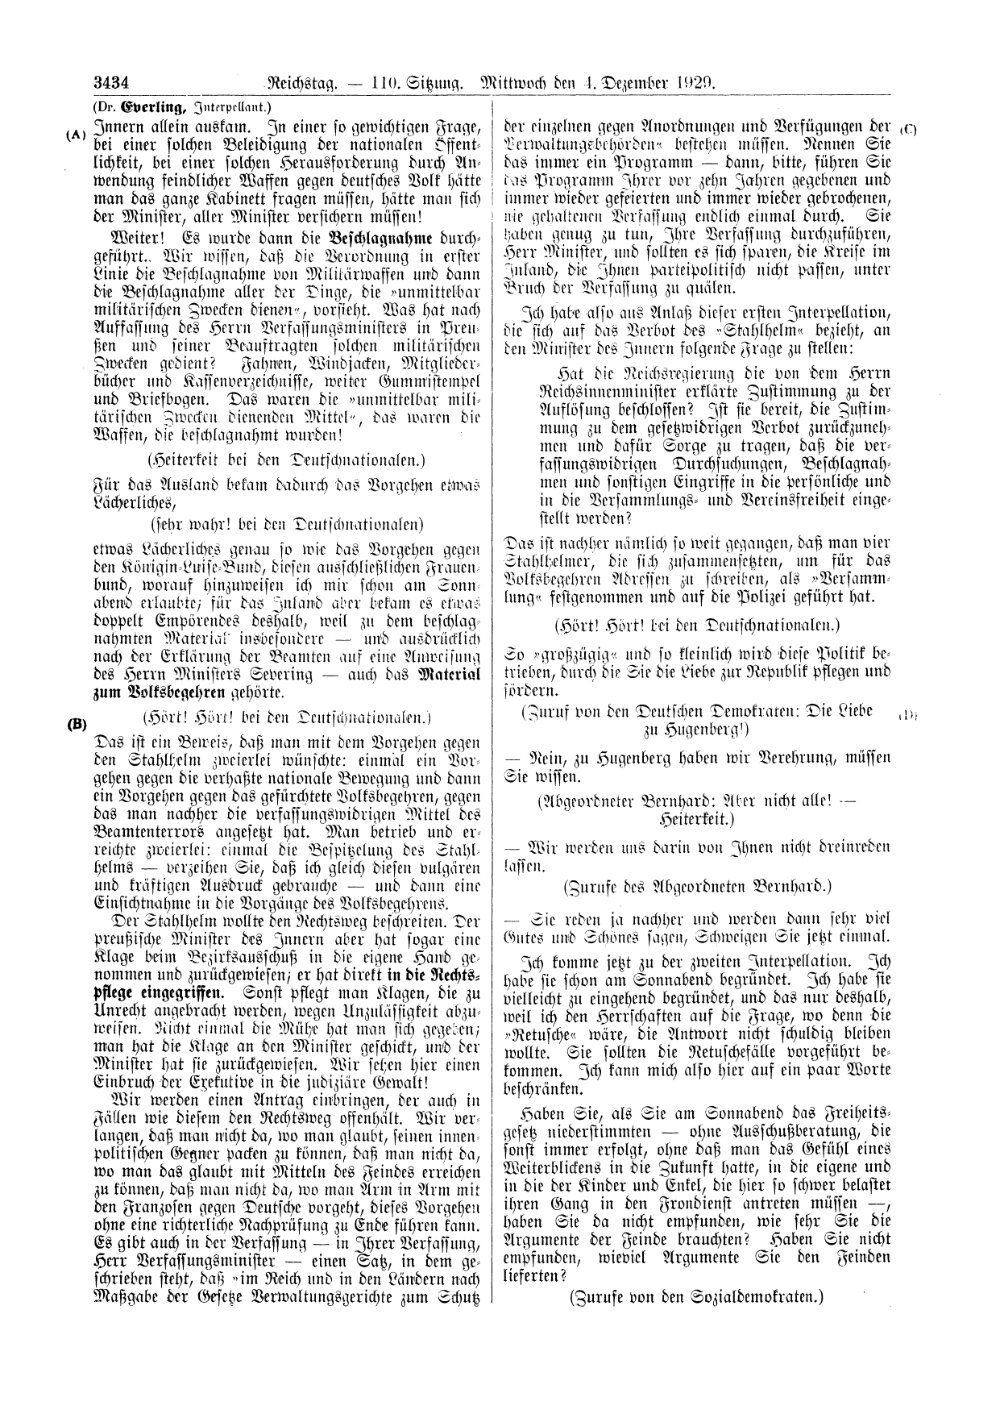 Scan of page 3434